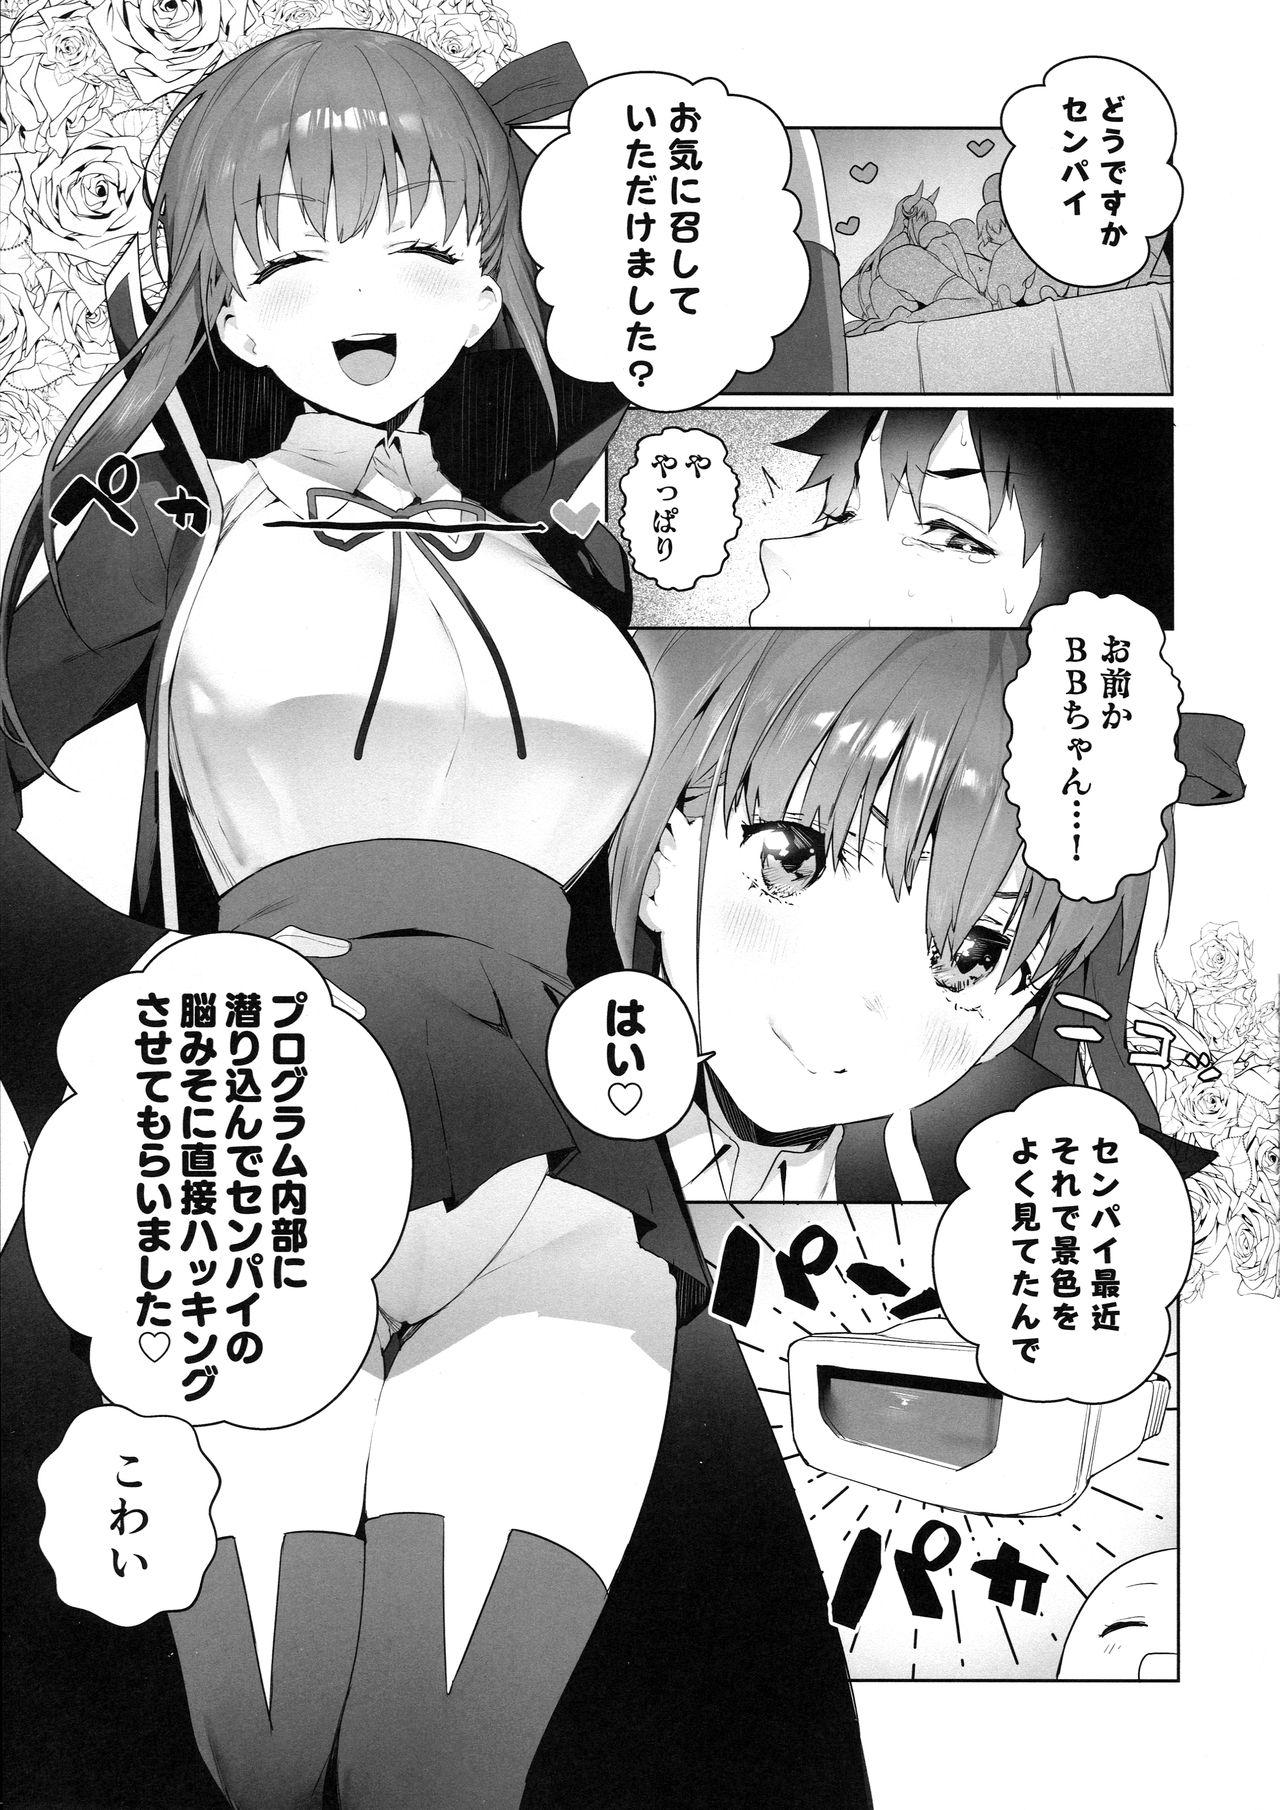 Porn Star LOVELESS - Fate grand order Compilation - Page 4